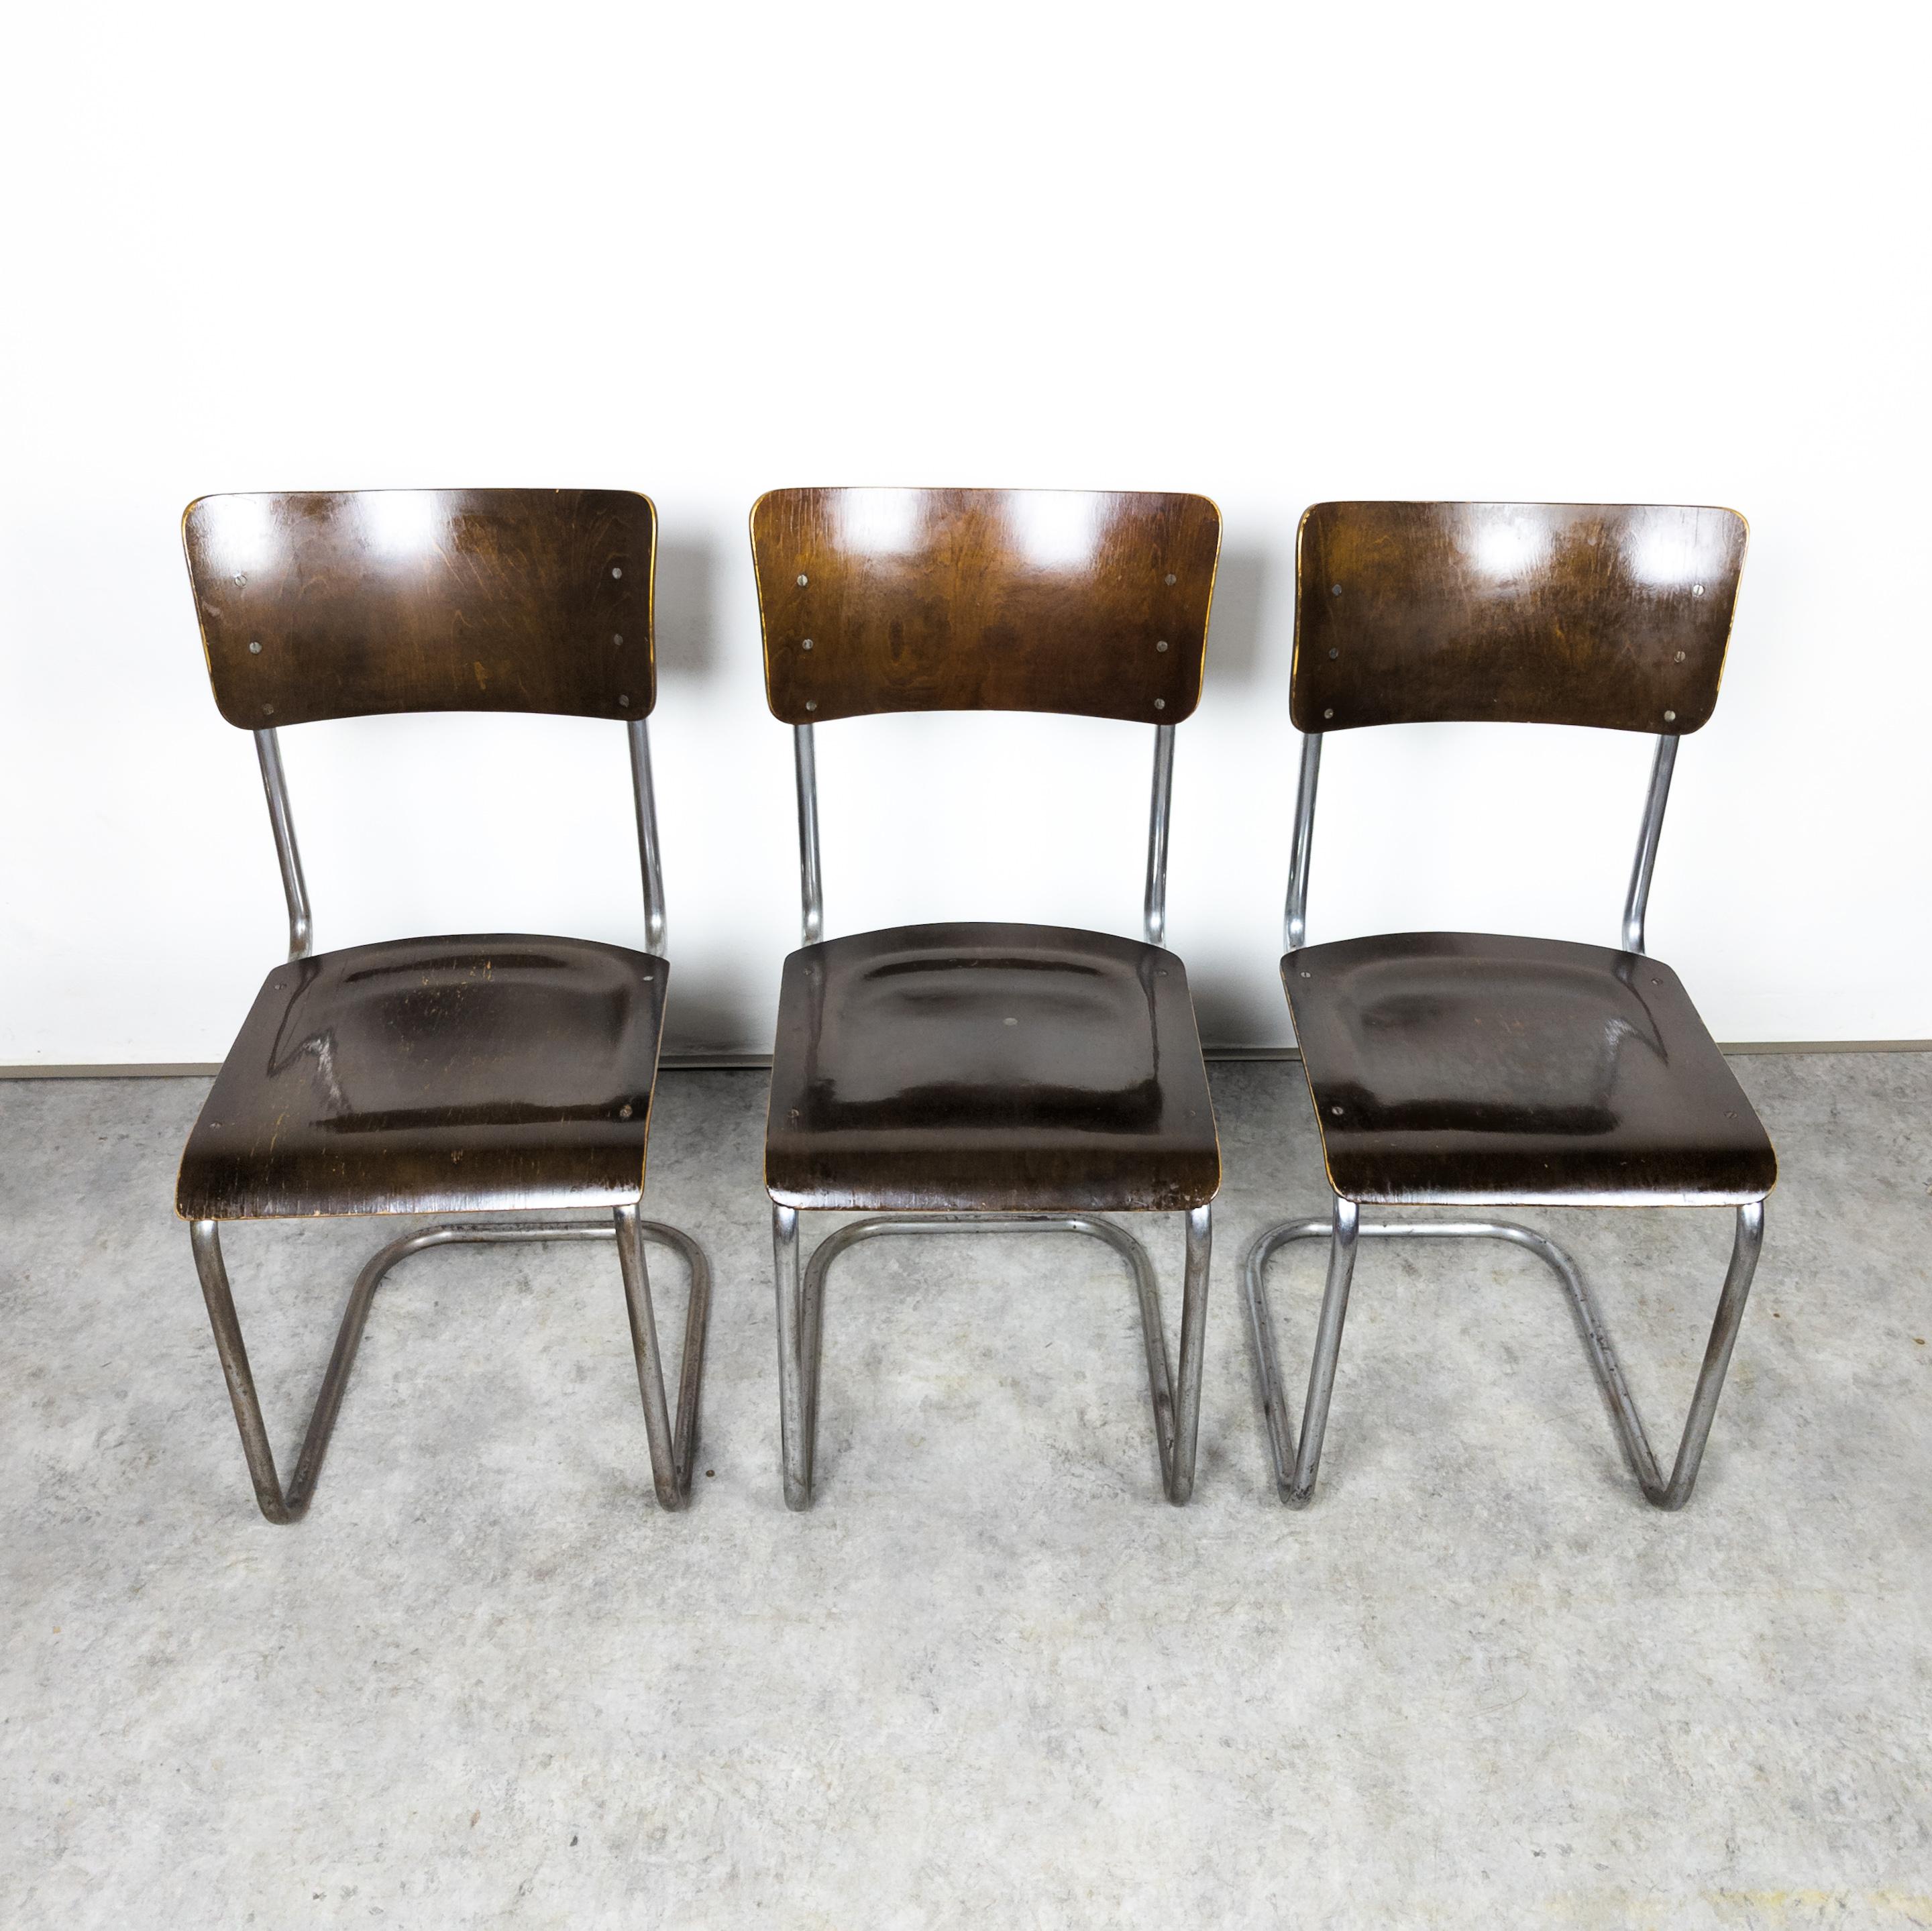 Steel Early S 43 cantilever chairs by Mart Stam, 1930s For Sale